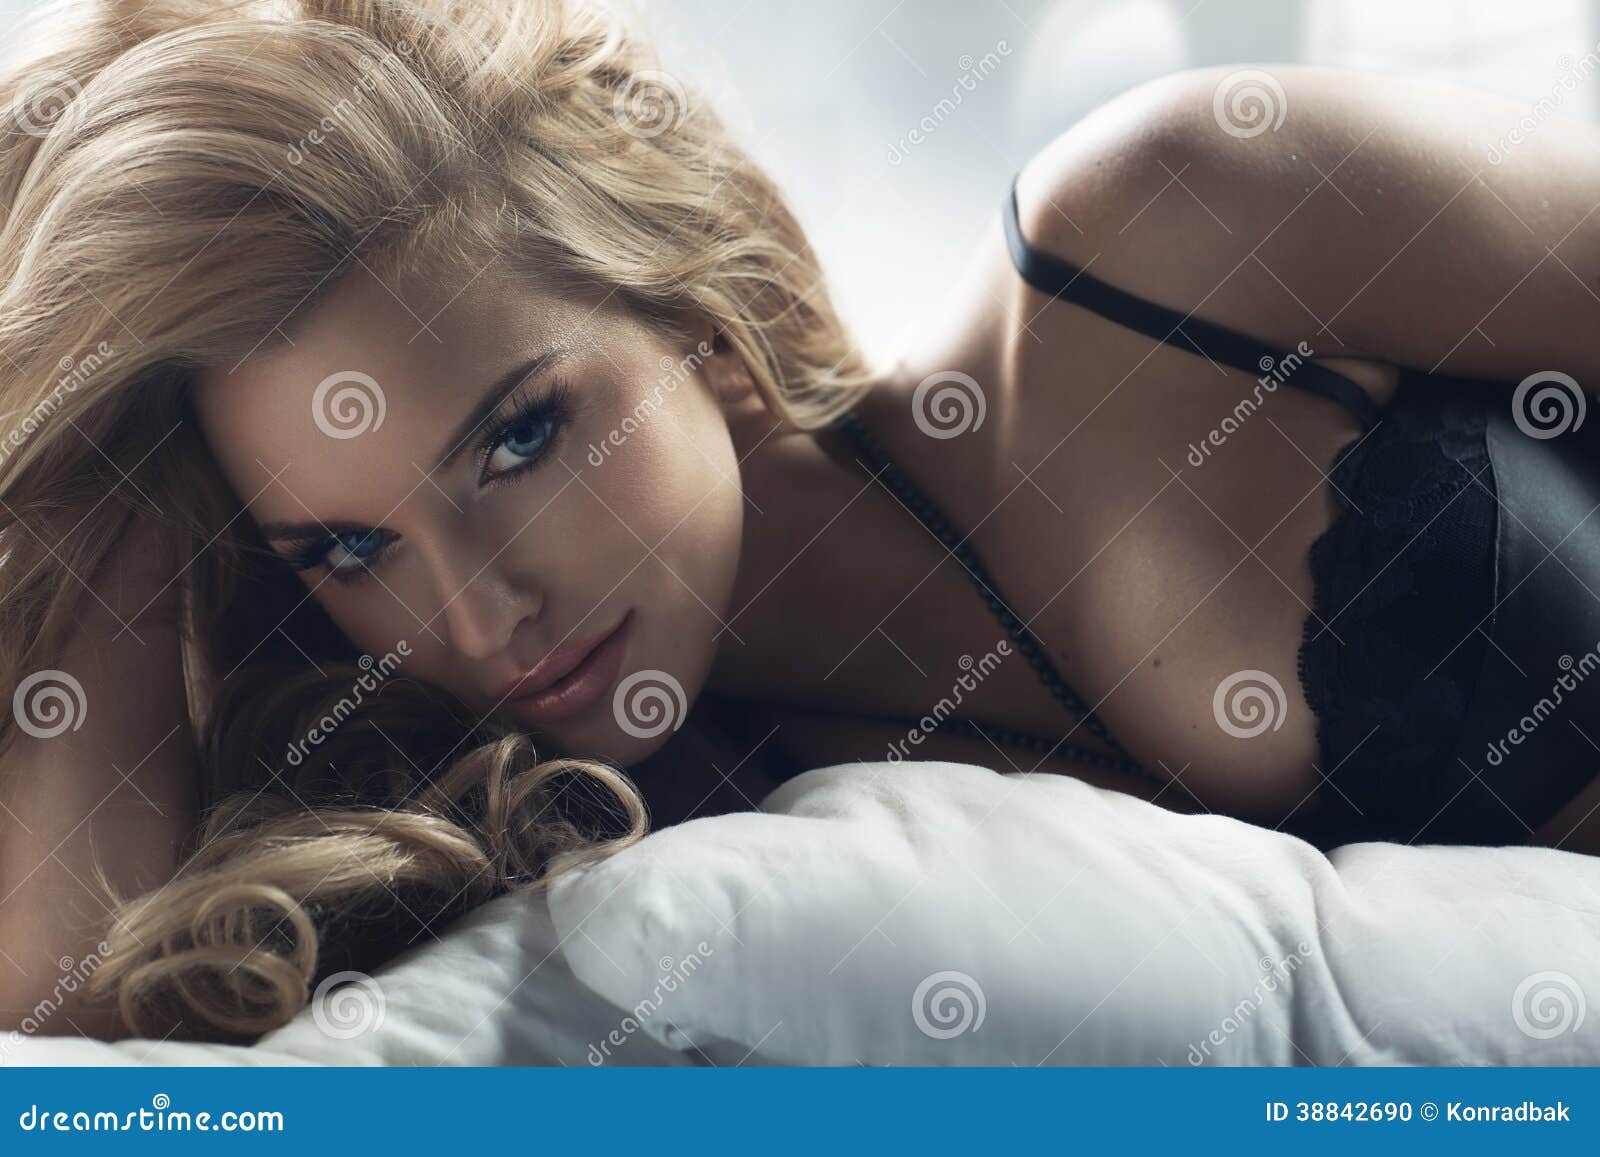 blonde woman with amazing eyes